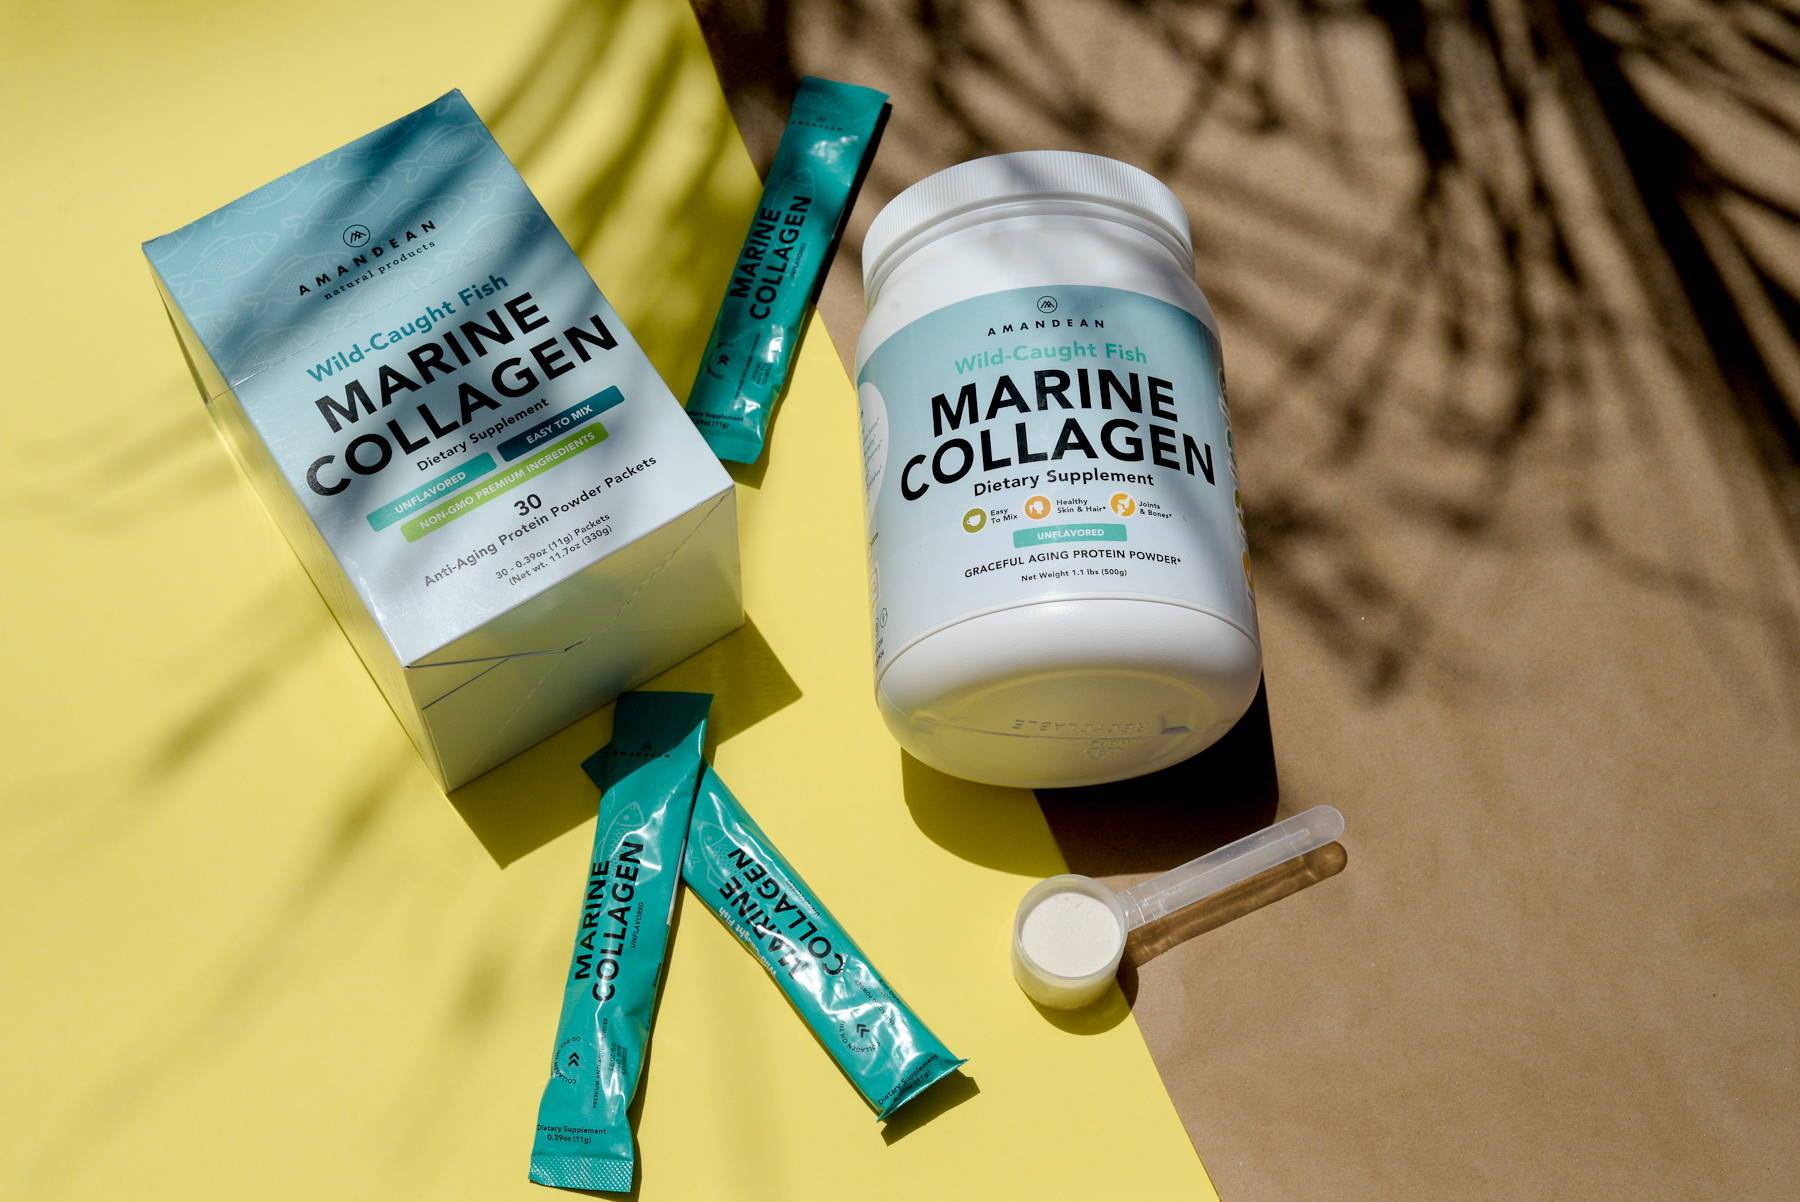 "Marine Collagen is a MUST for every household!"